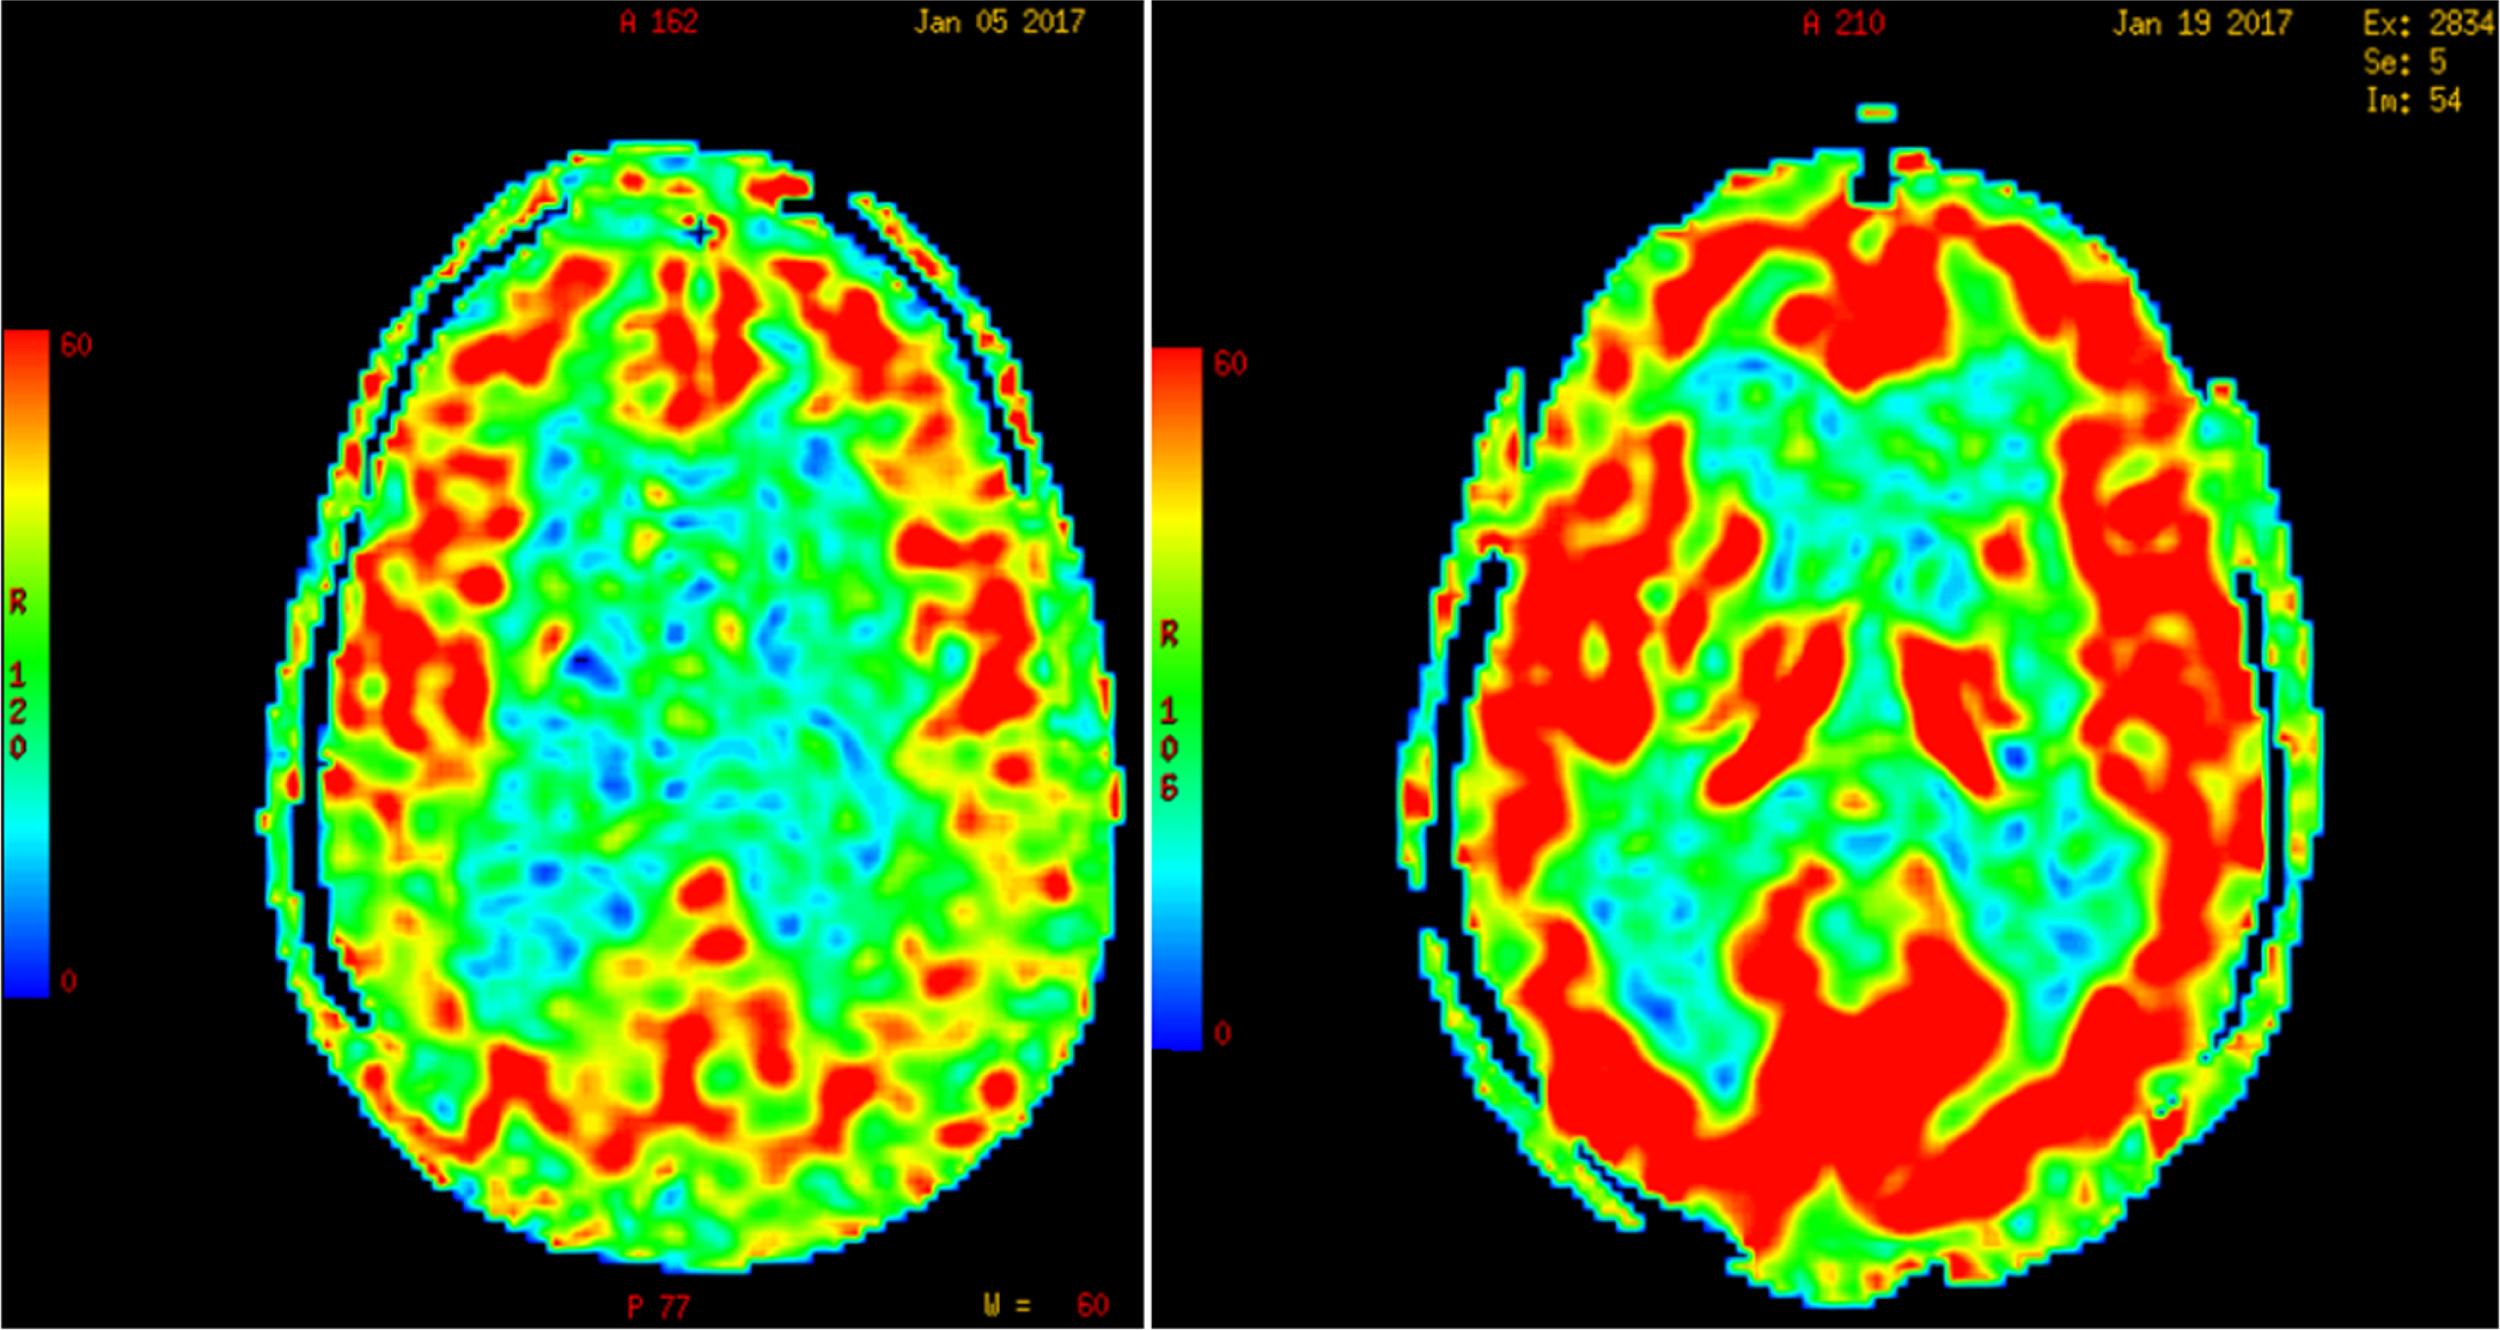 Increase in global cerebral blood flow determined by arterial spin label MR imaging post-lumbar puncture in a patient with normal-pressure hydrocephalus. (Román GC and Fung S, unpublished data).